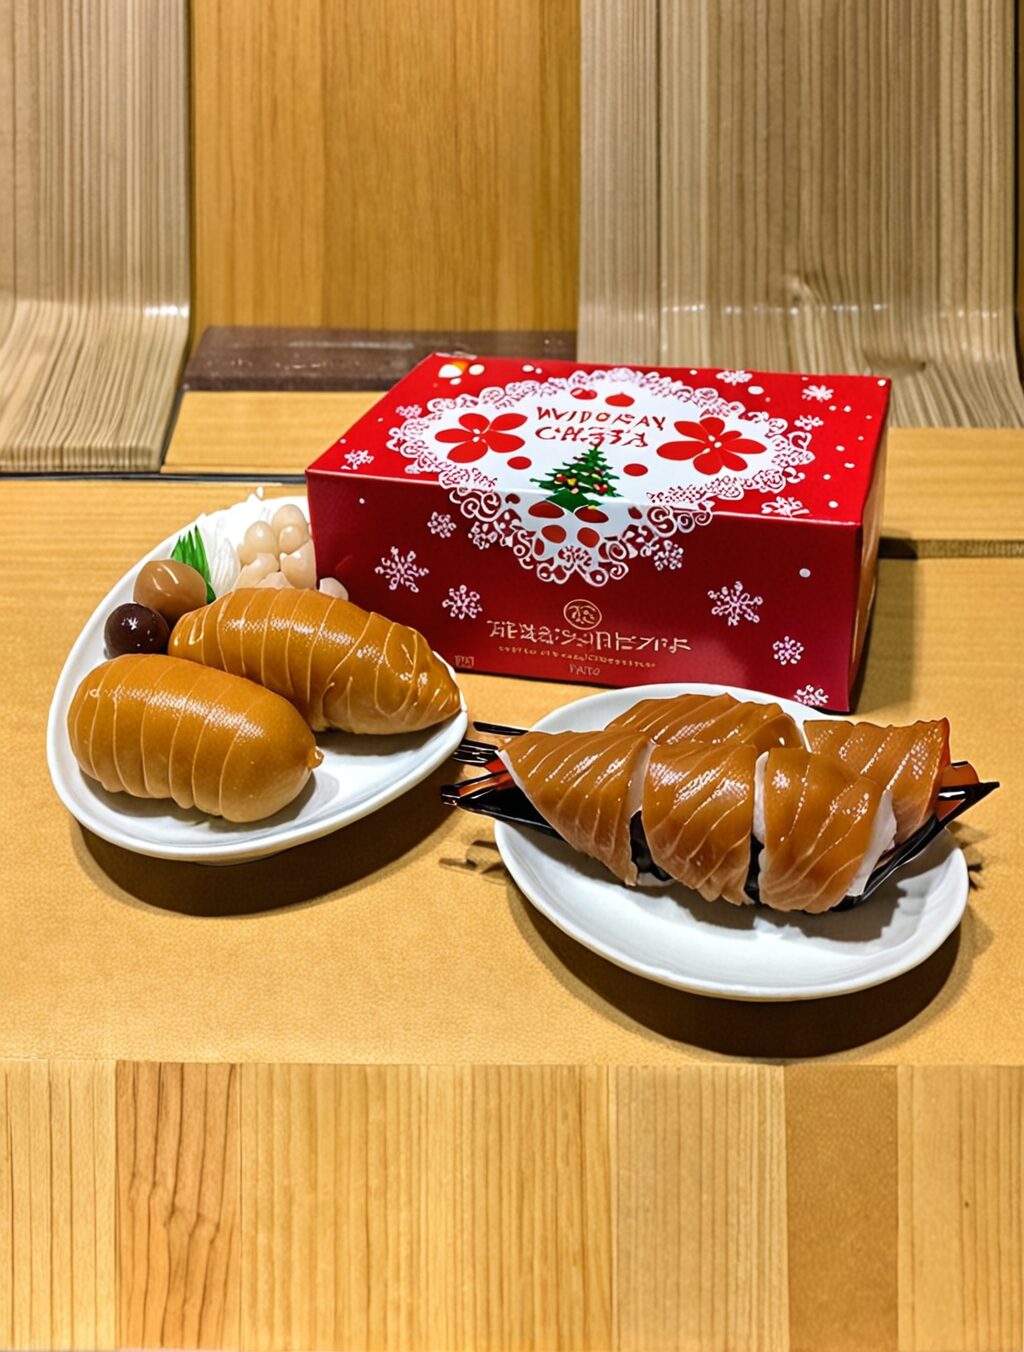 what do japan eat at christmas